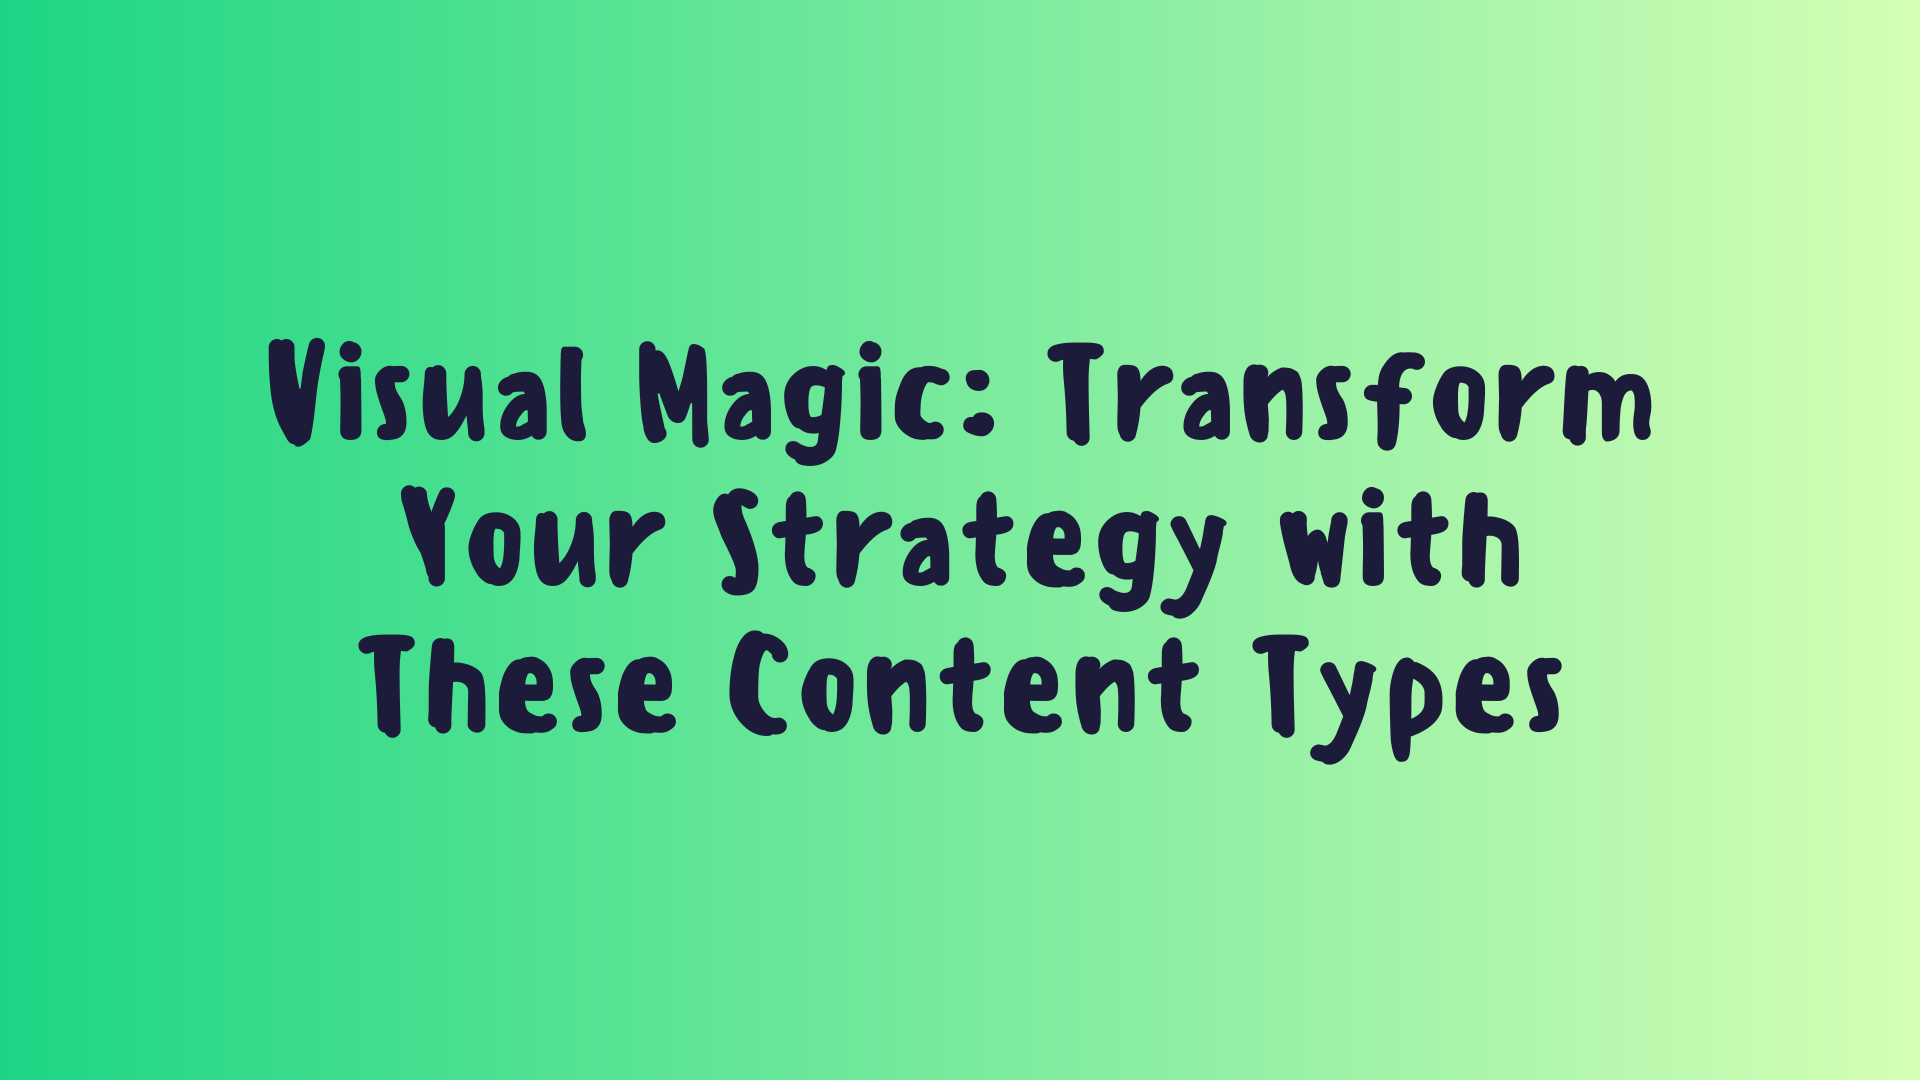 Visual Magic: Transform Your Strategy with These Content Types